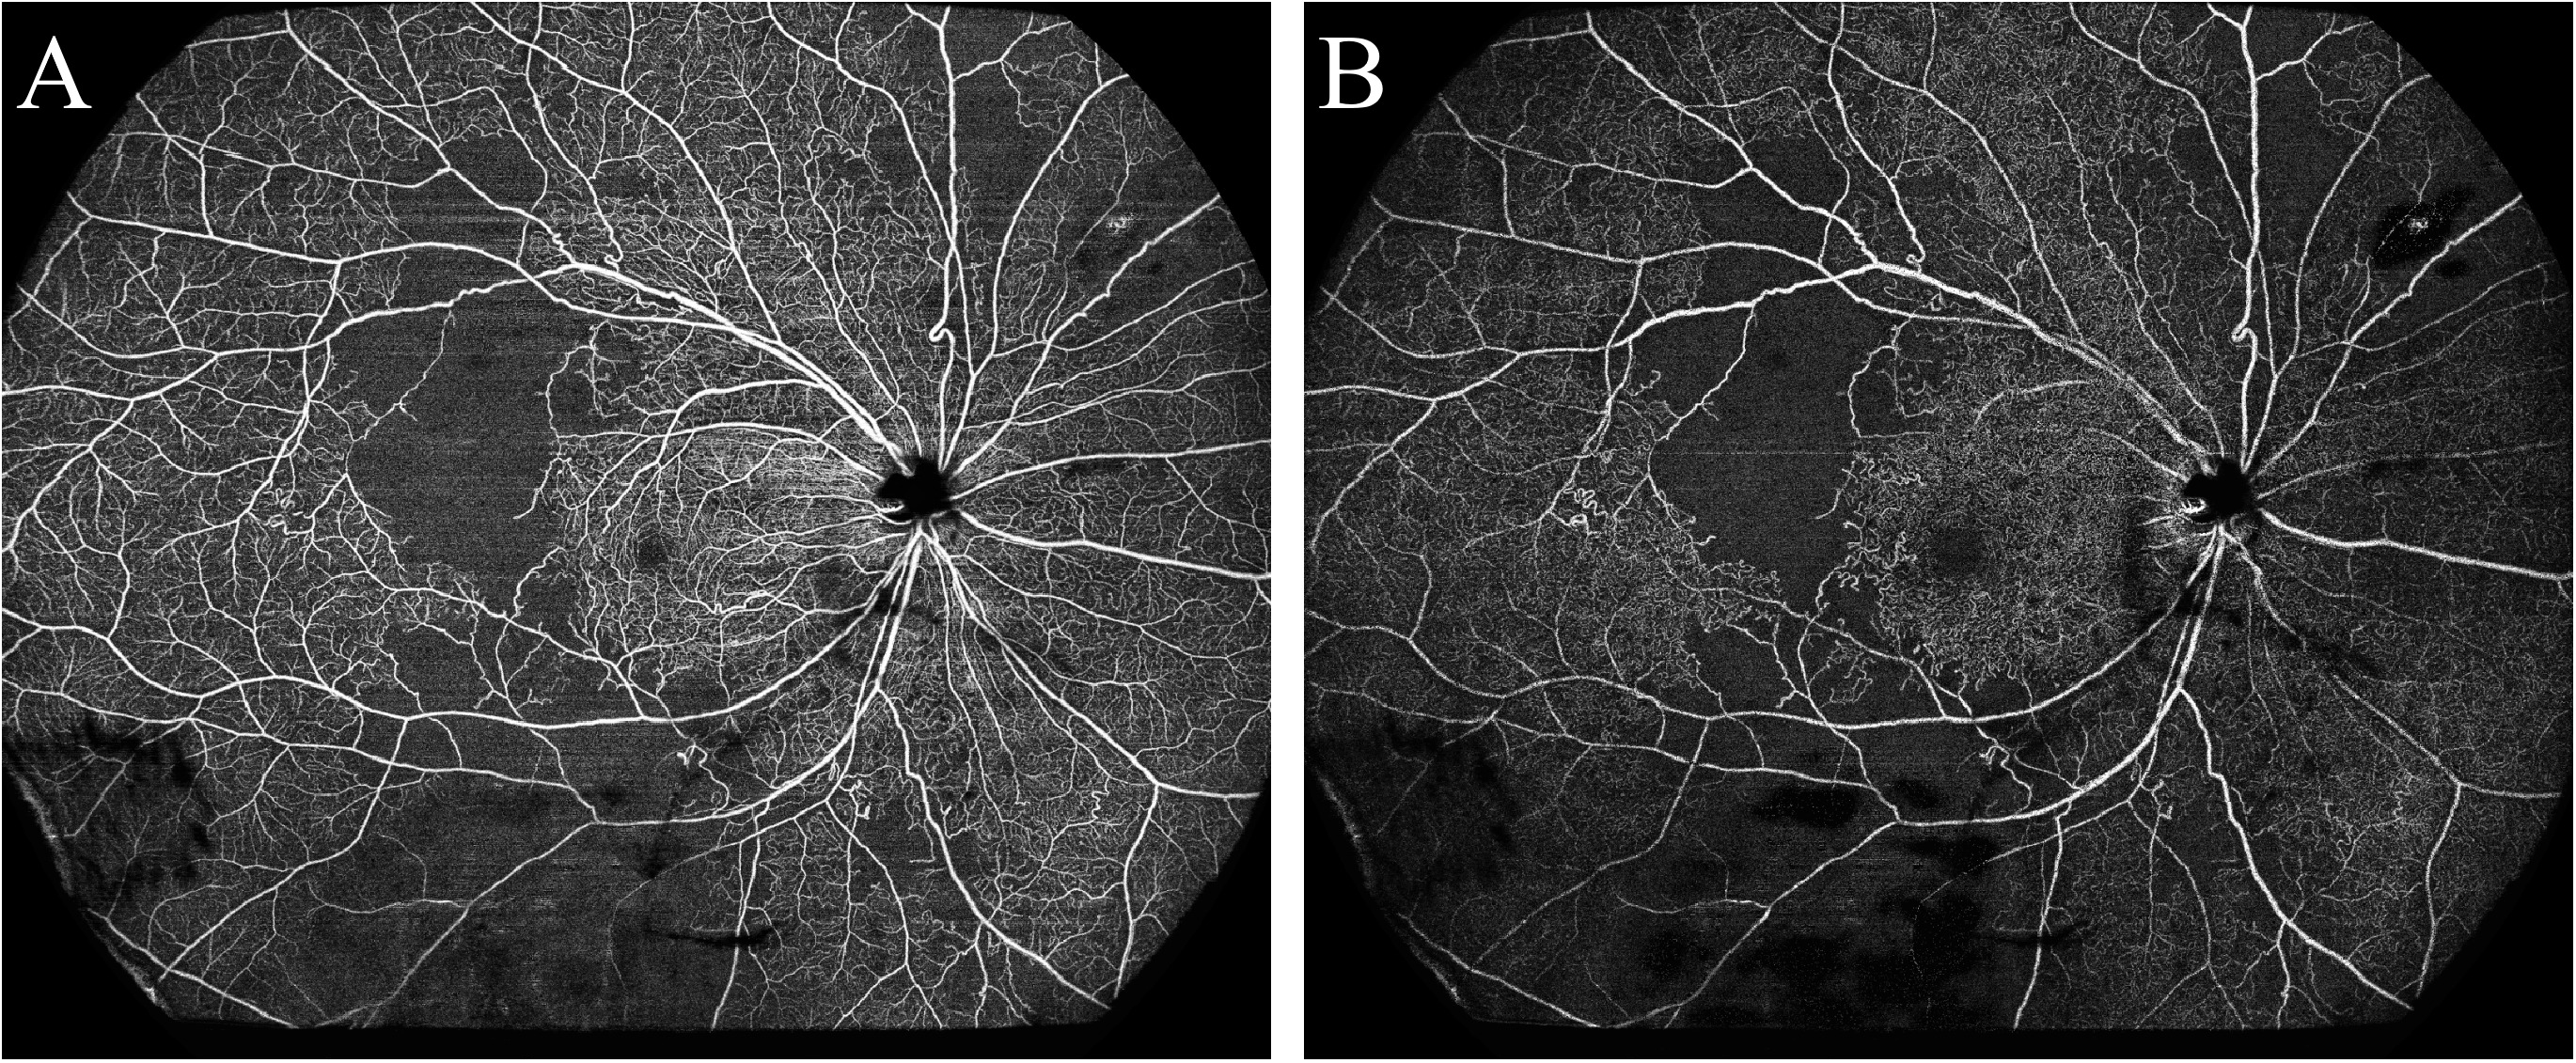 Vessel Density Changes and It Is Positively Correlated with Disease Activity in SLE Eyes